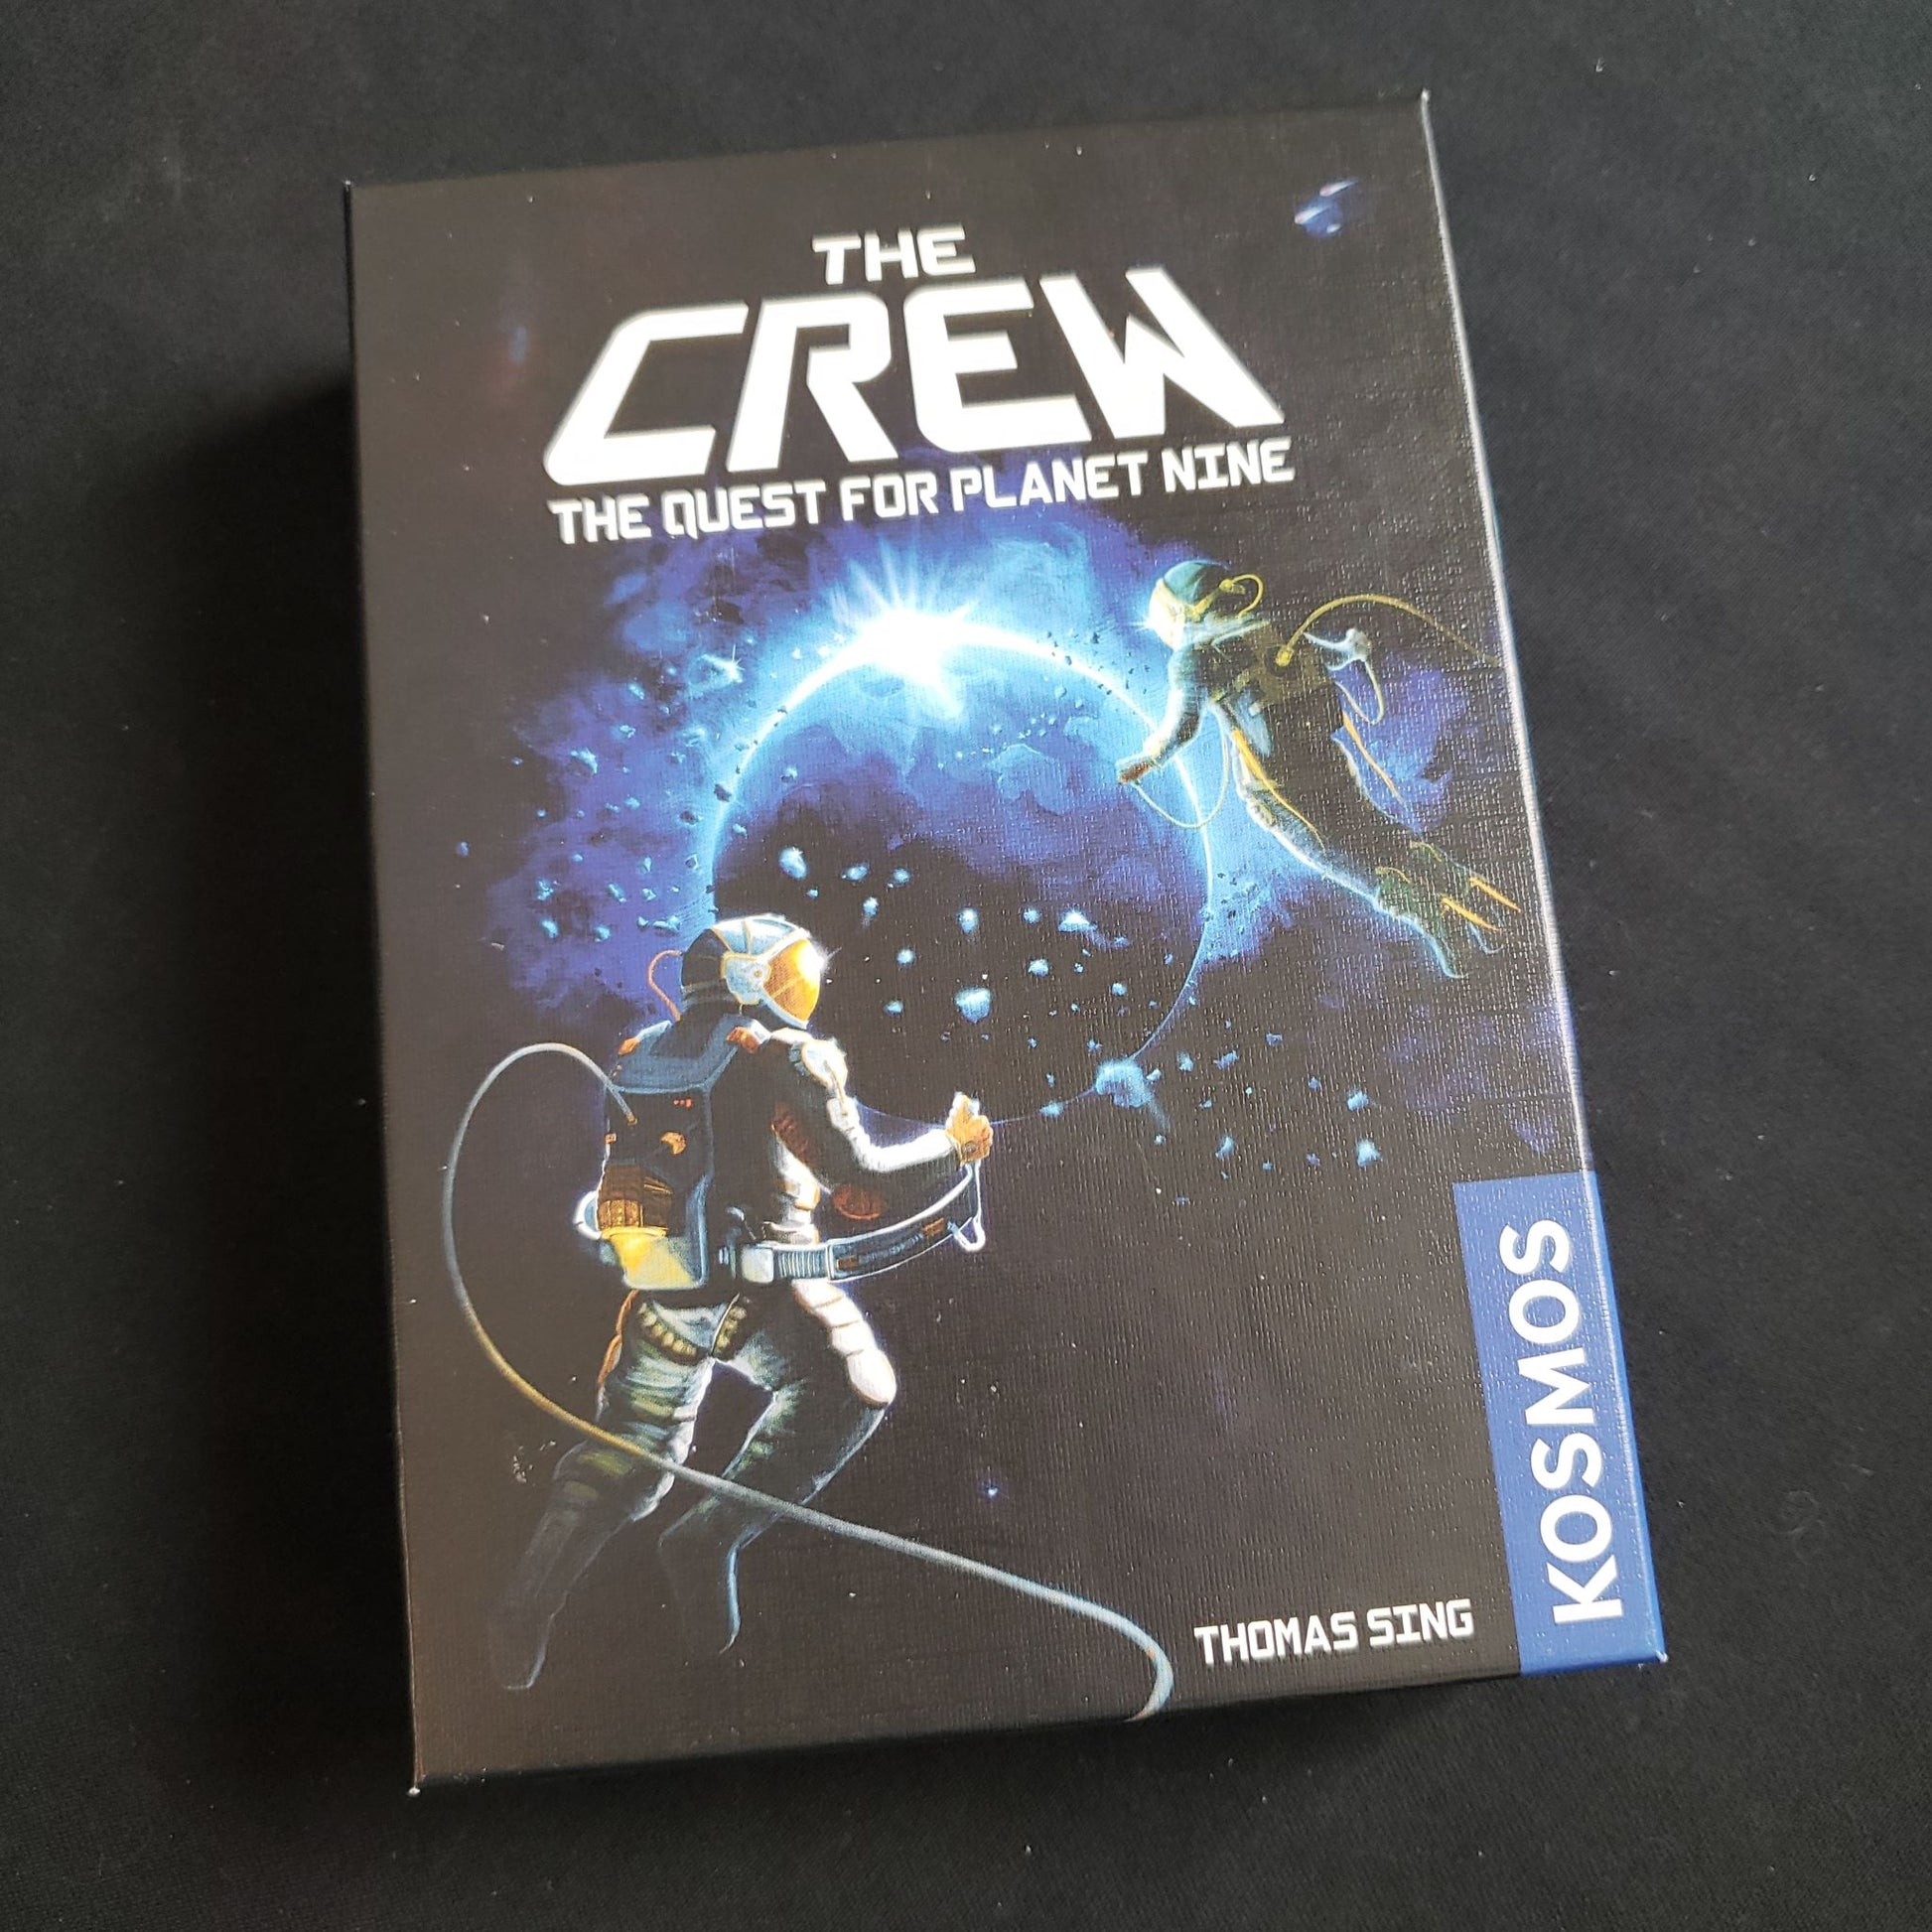 Image shows the front cover of the box of The Crew: The Quest for Planet Nine card game